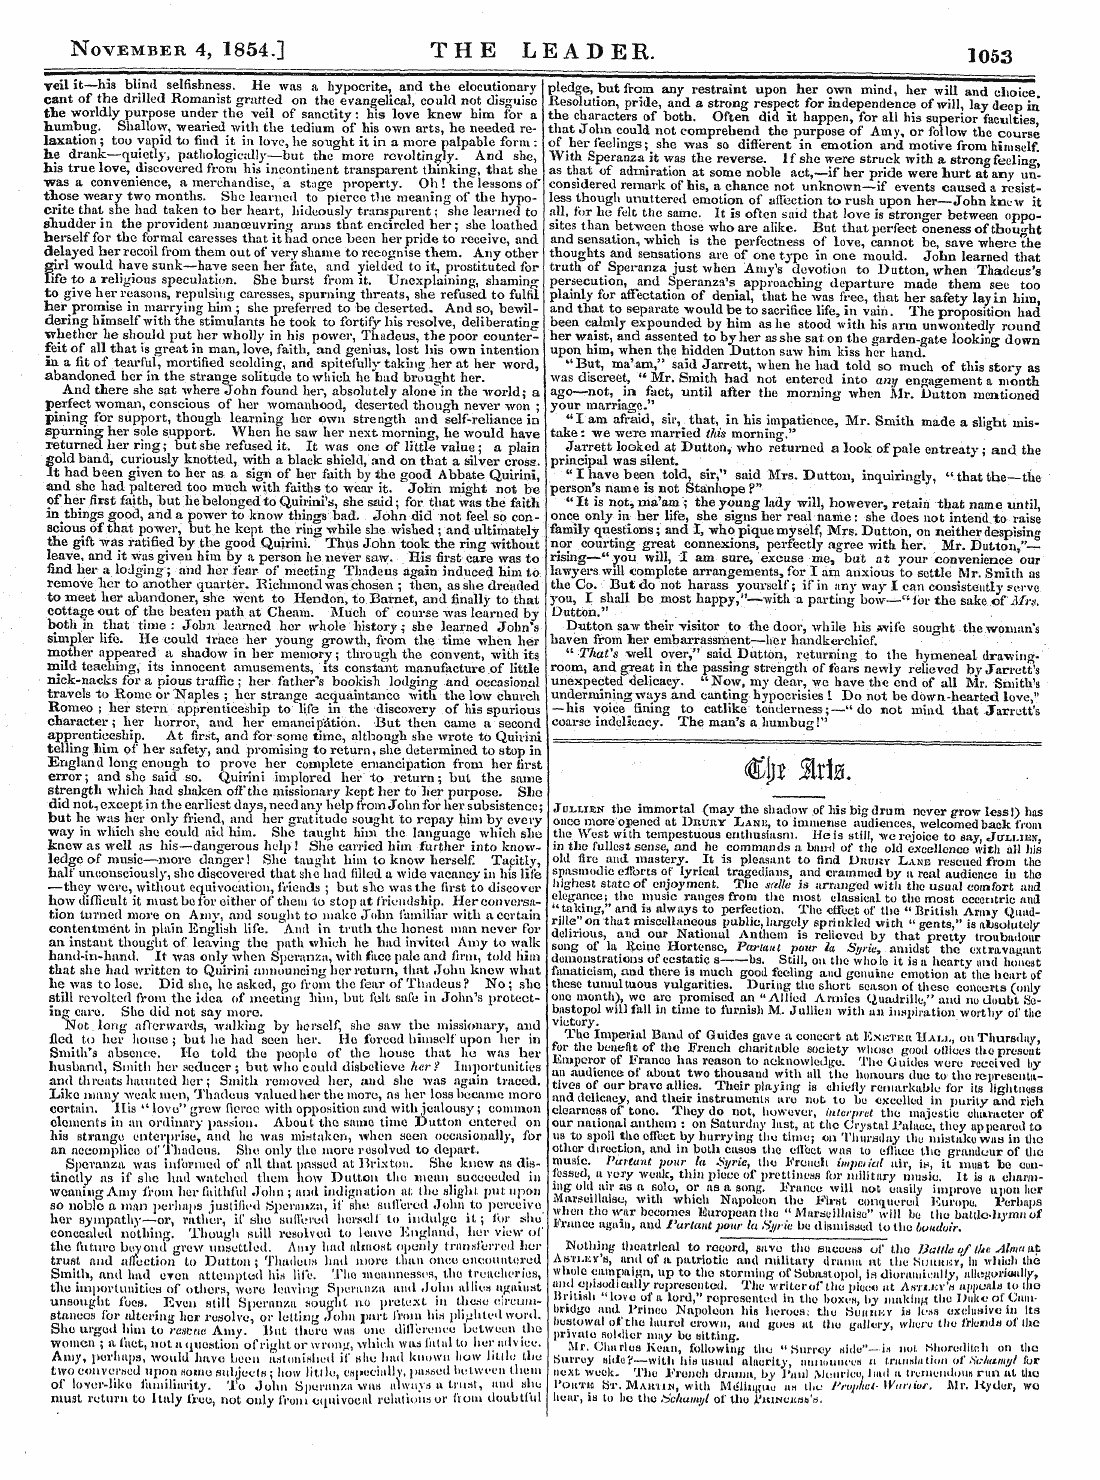 Leader (1850-1860): jS F Y, Country edition - November 4, 1854.] The Leader. 1053